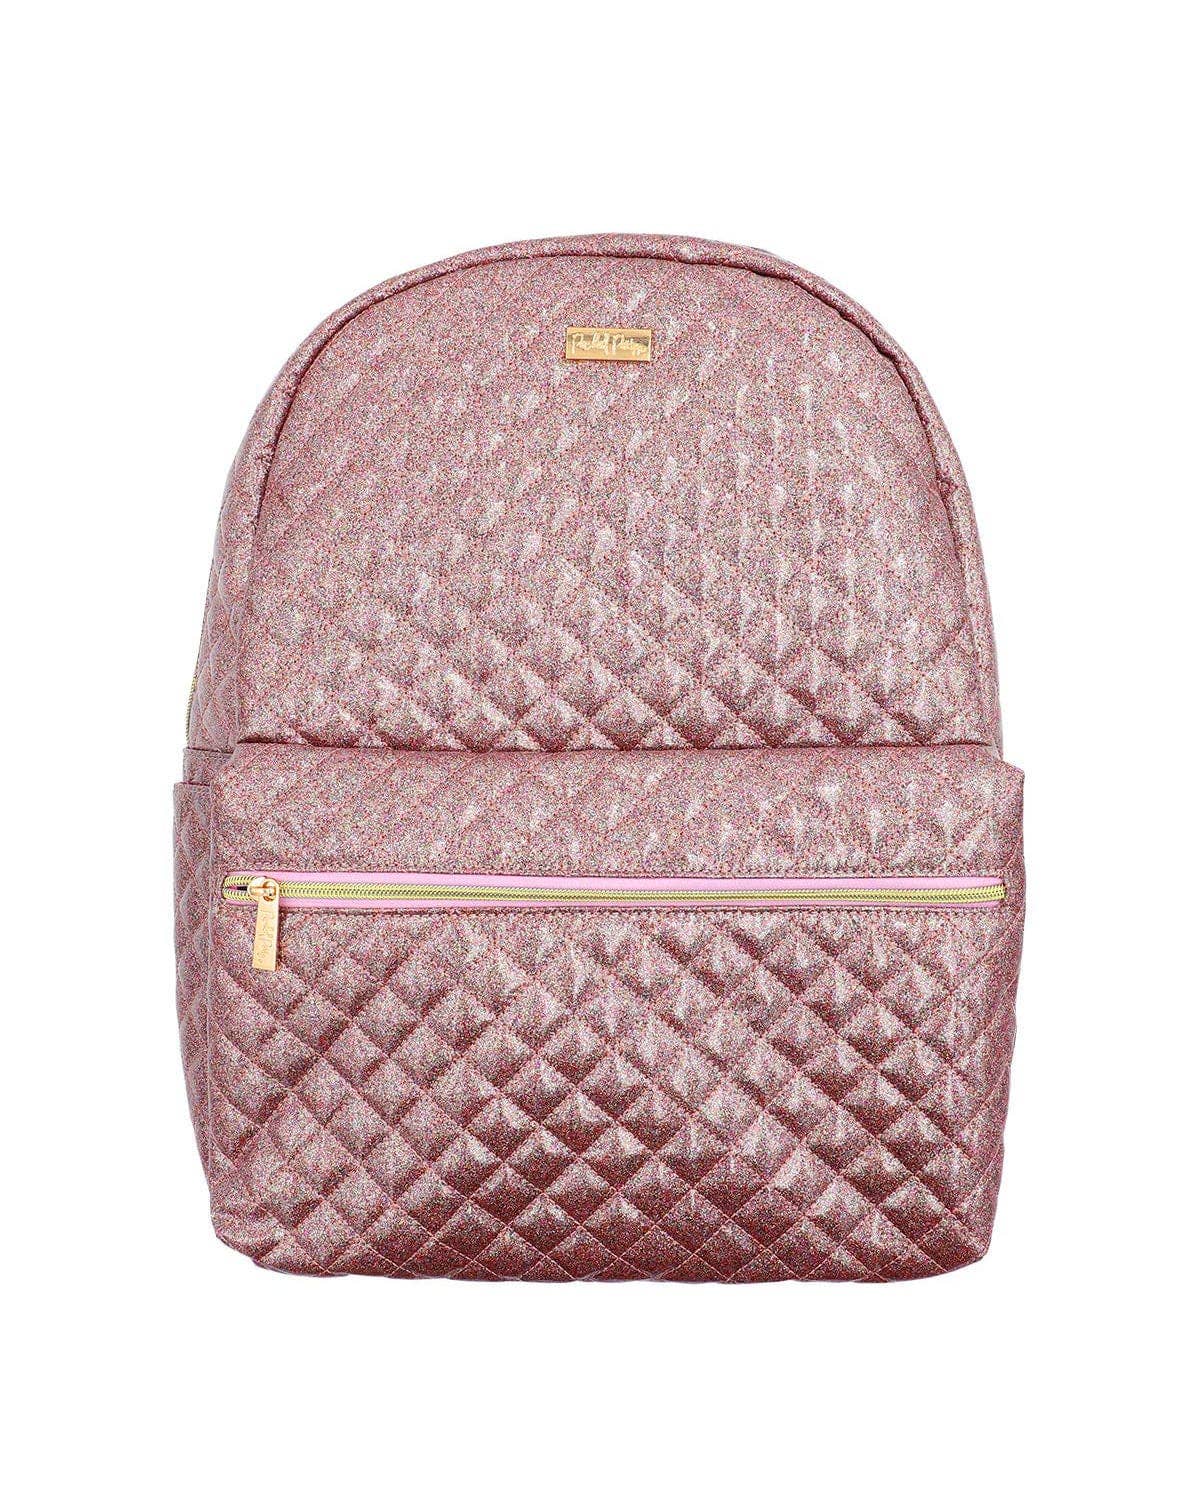 Packed Party - Glitter Party Backpack